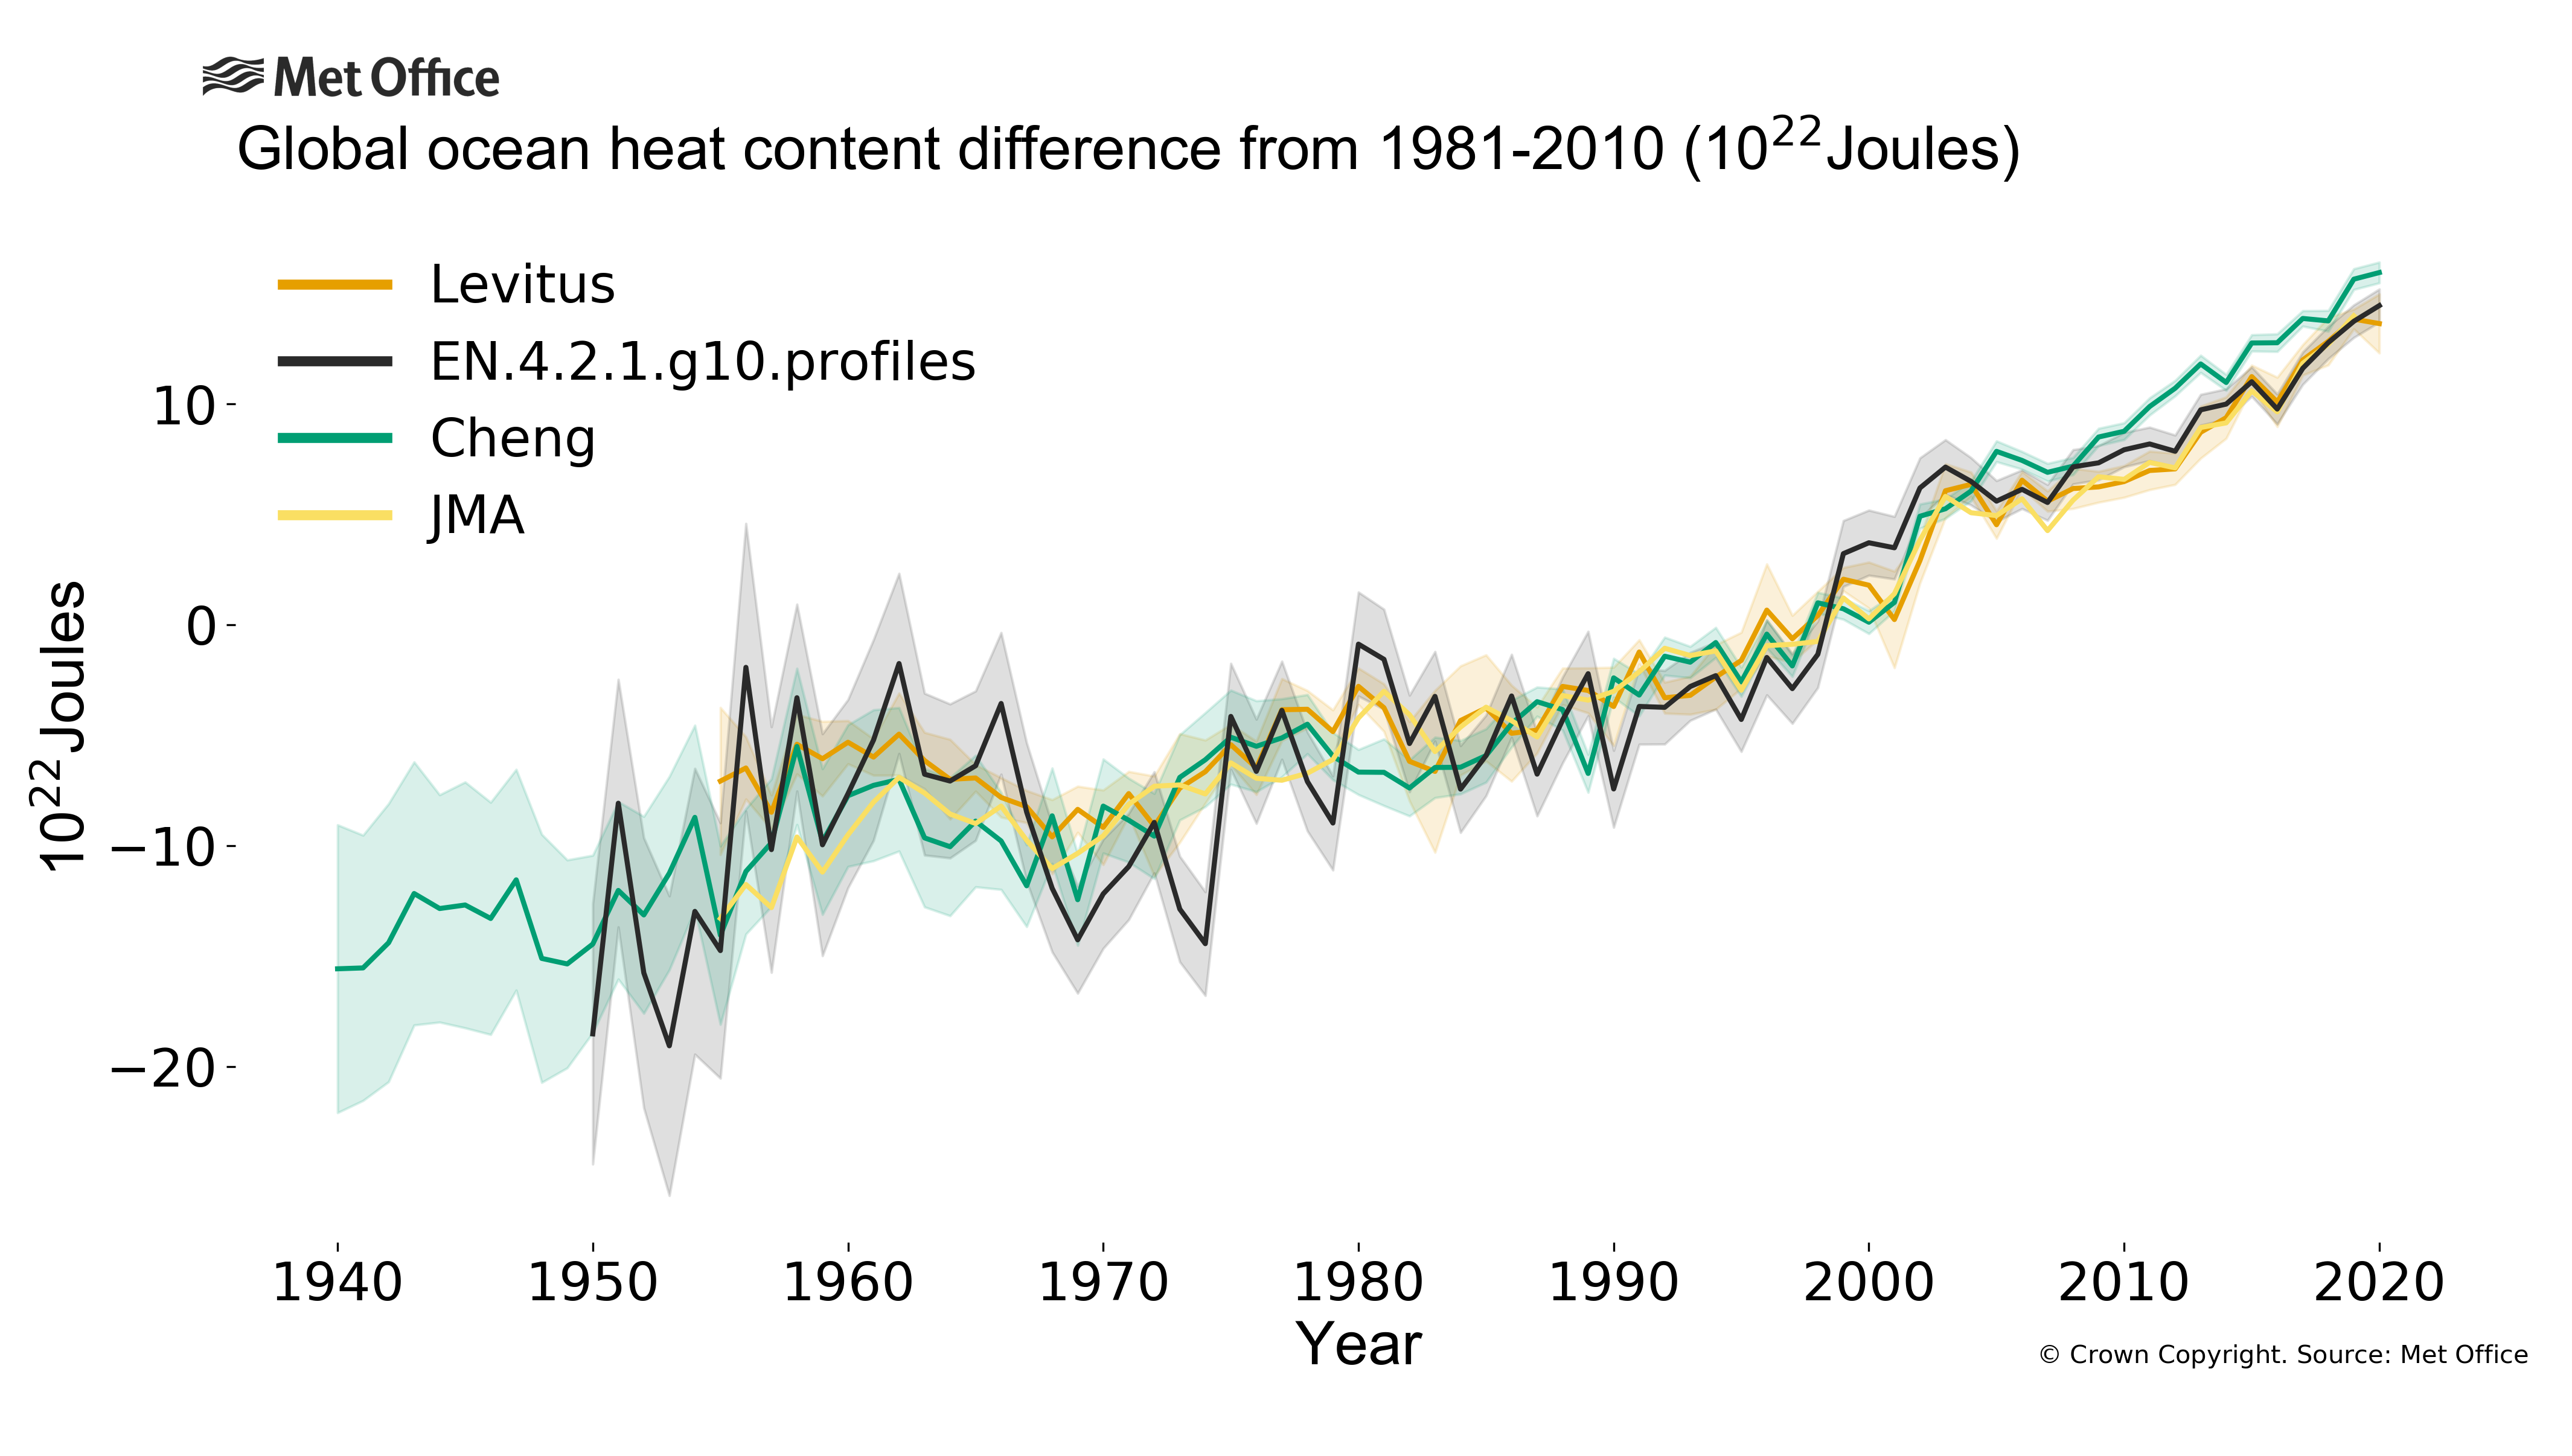 
Annual global ocean heat content to a depth of 700m expressed as a difference from the 1981-2010 average.
